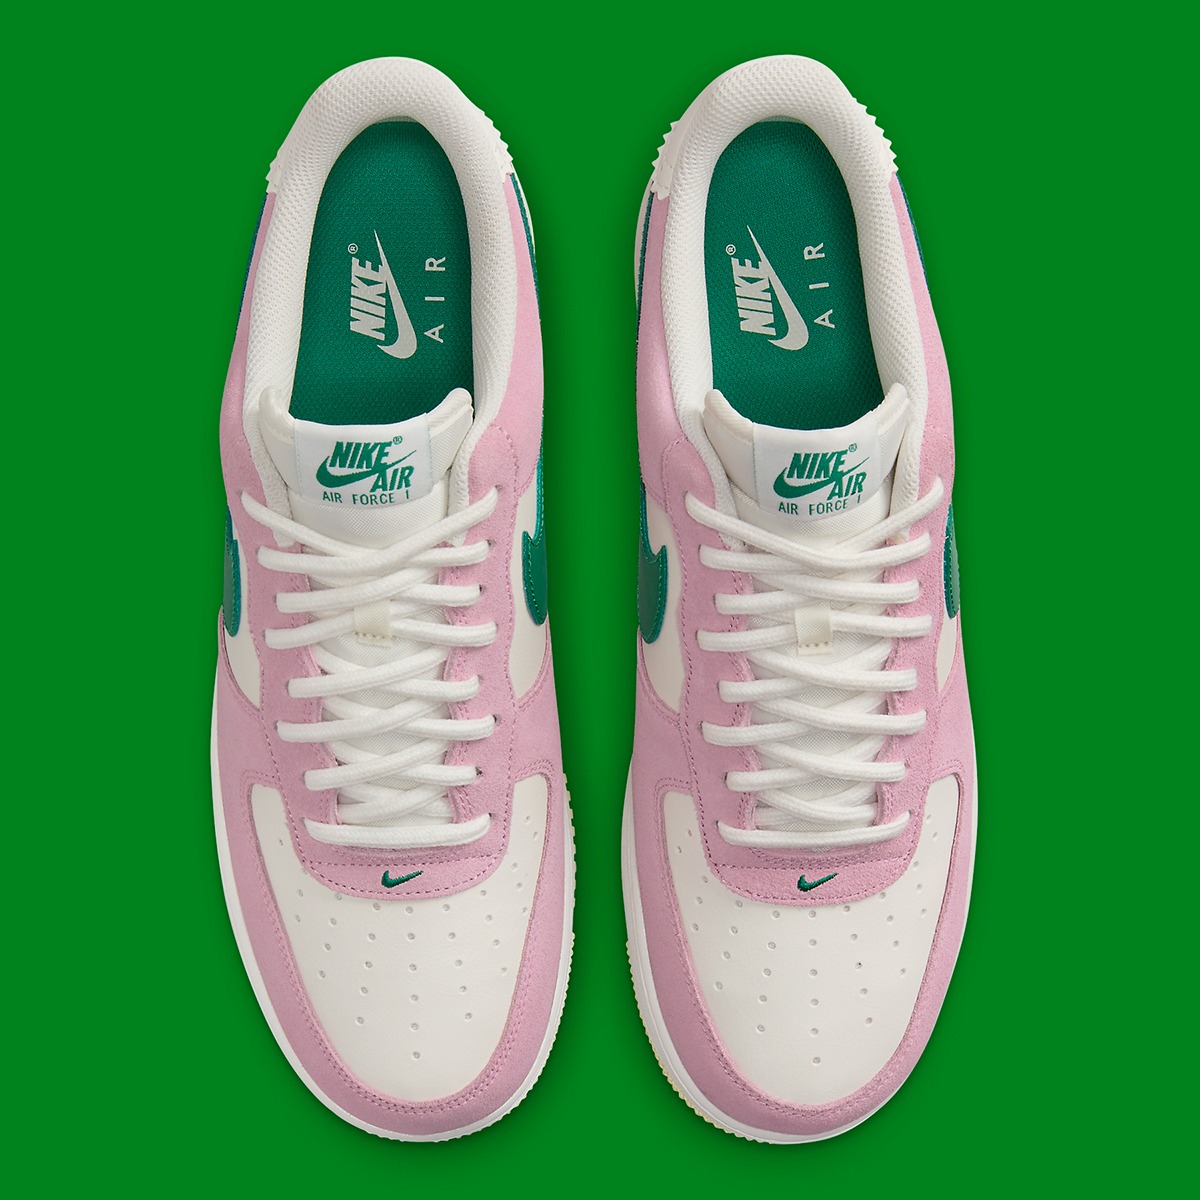 nike live lunar women turquoise color shoes sneakers Sail Malachite Soft Pink Alabaster Fv9346 100 5